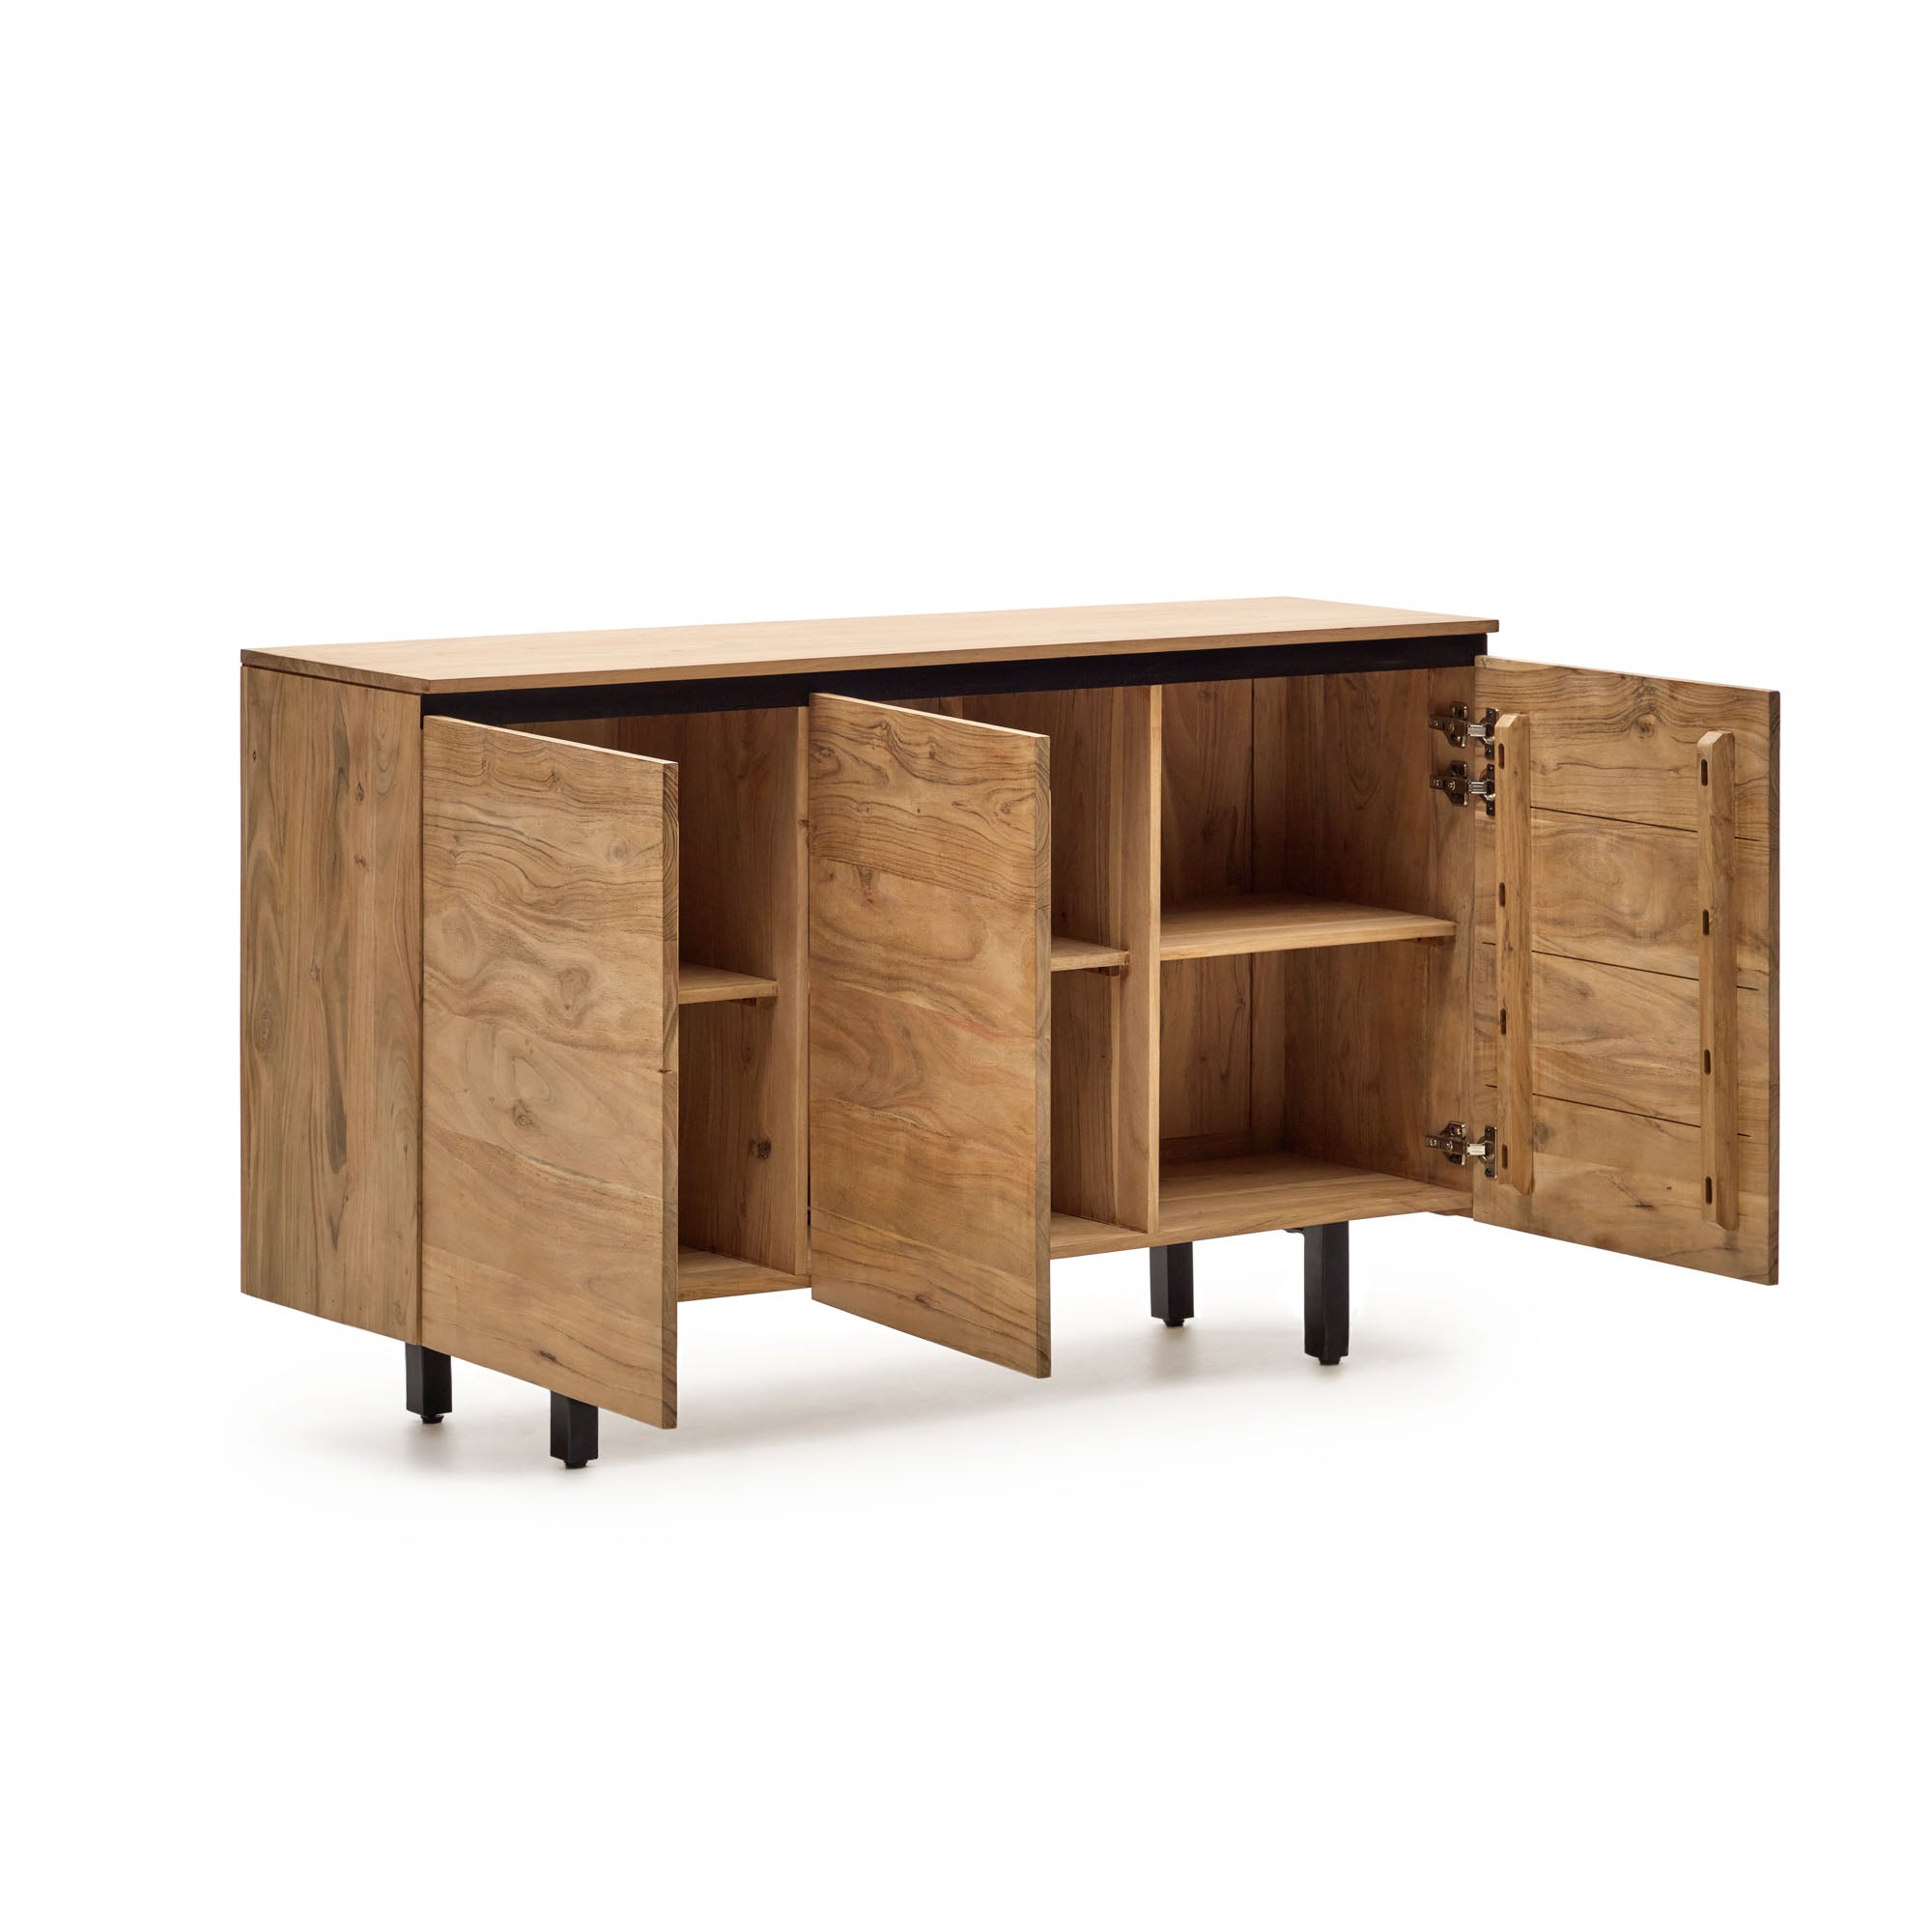 Uxue solid acacia wood sideboard in a natural finish, 150 x 88 cm